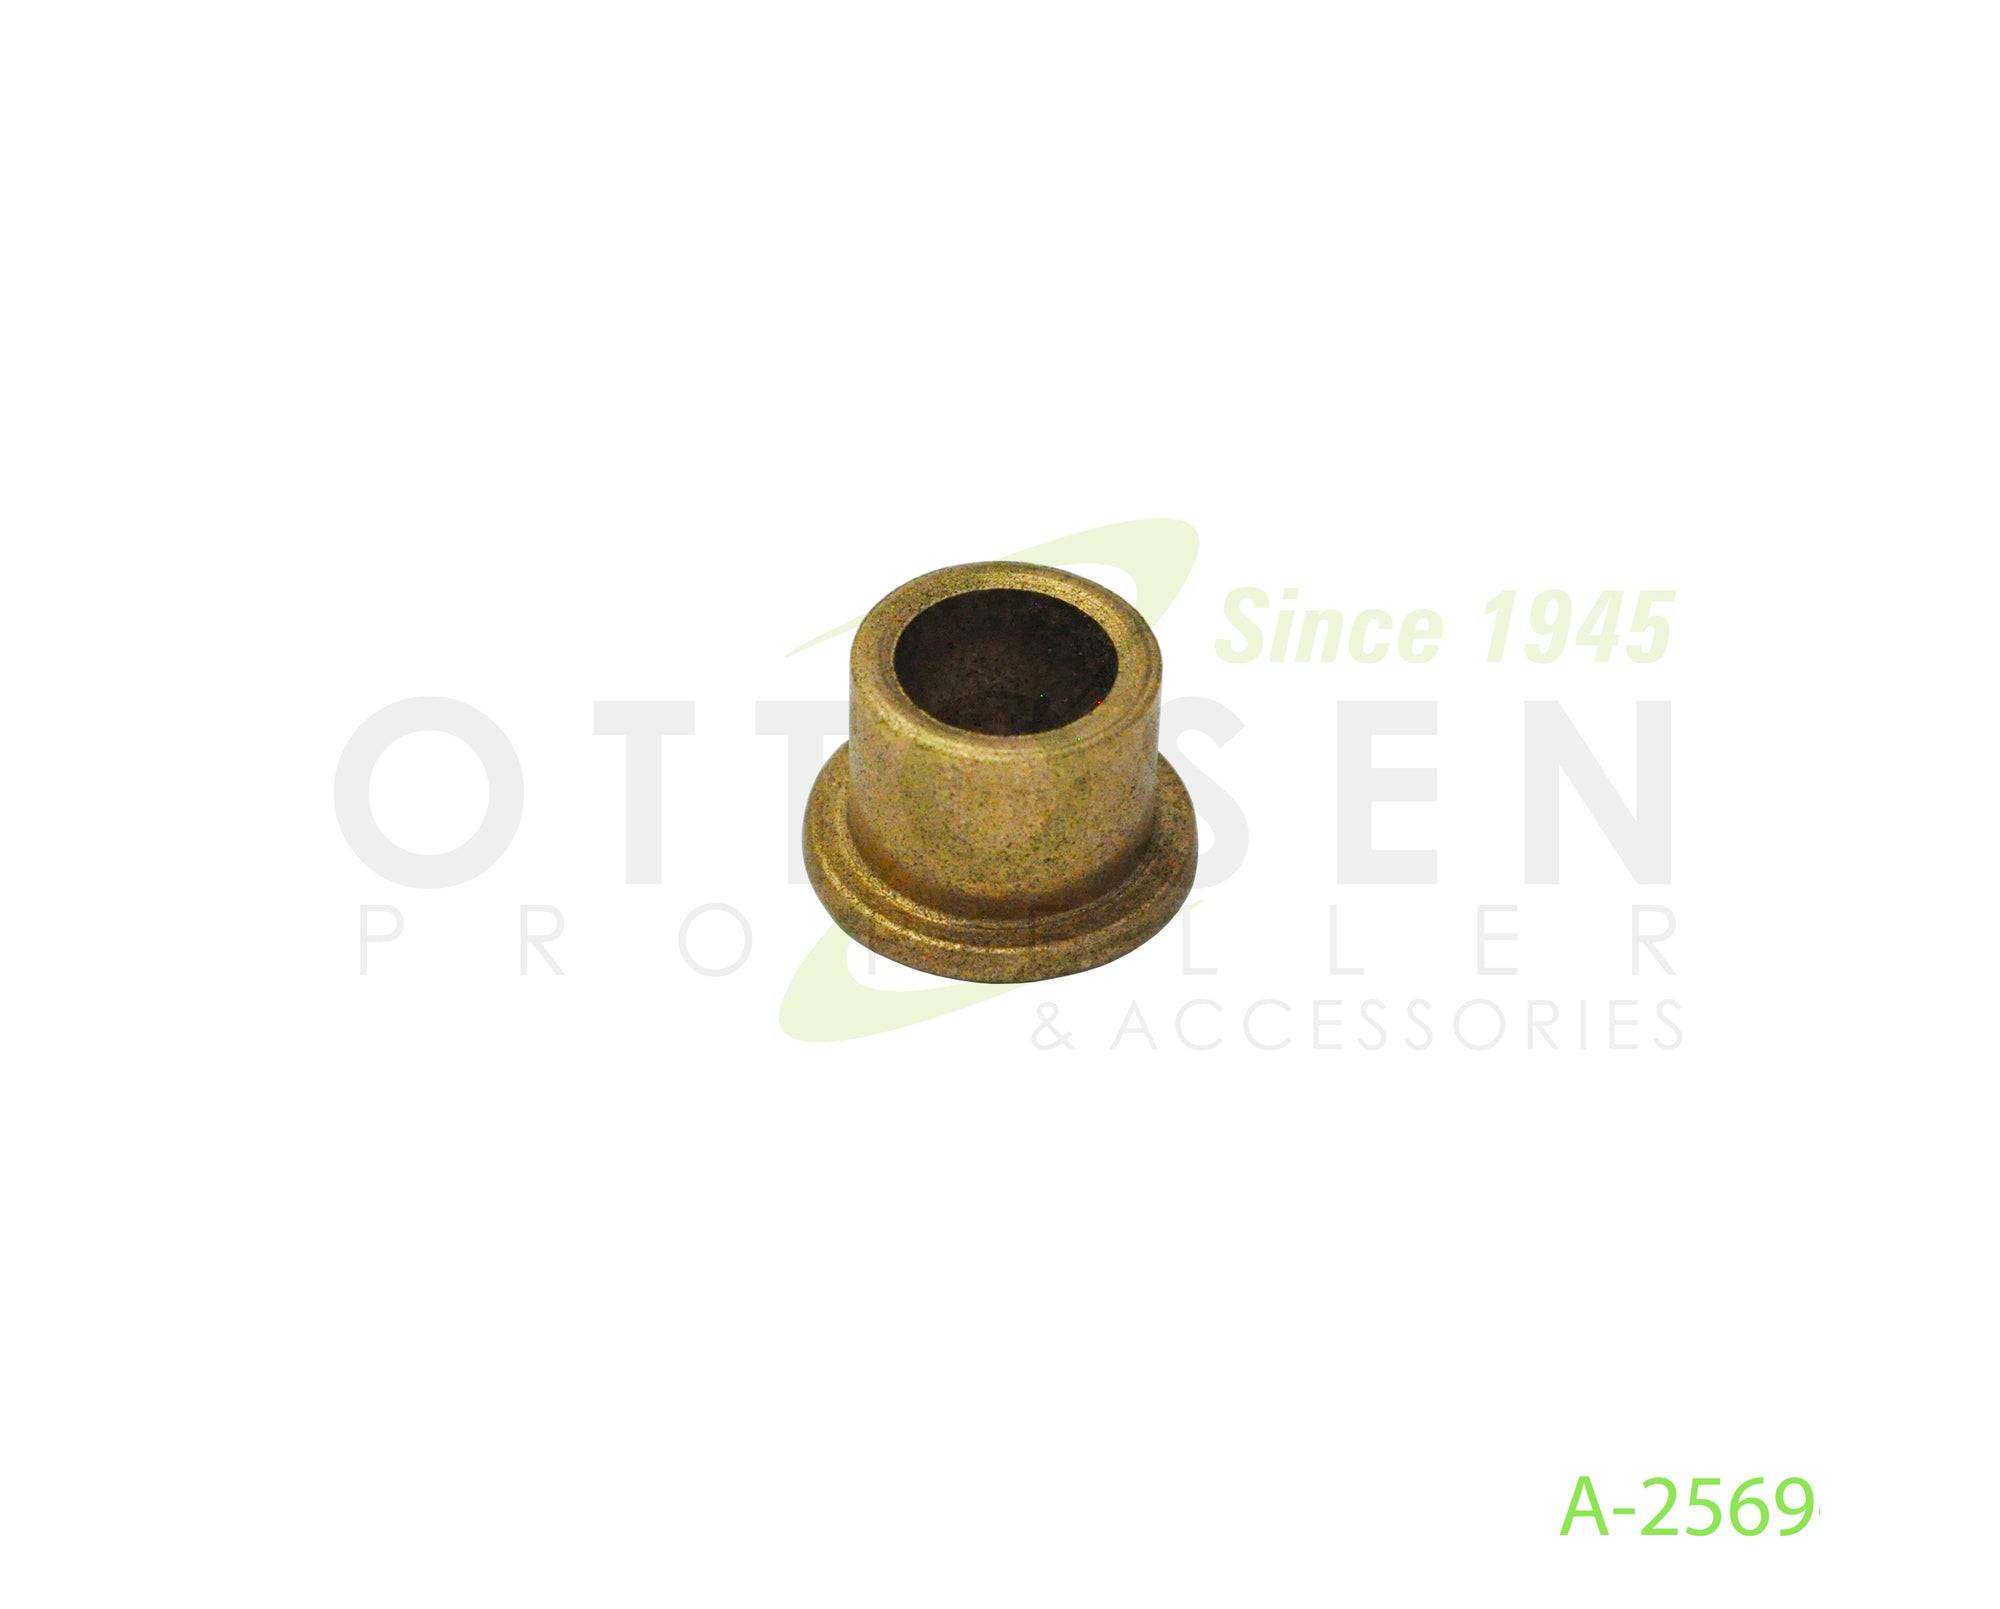 A-2569-HARTZELL-PROPELLER-CONTROL-SHAFT-GOVERNOR-BUSHING-PICTURE-1